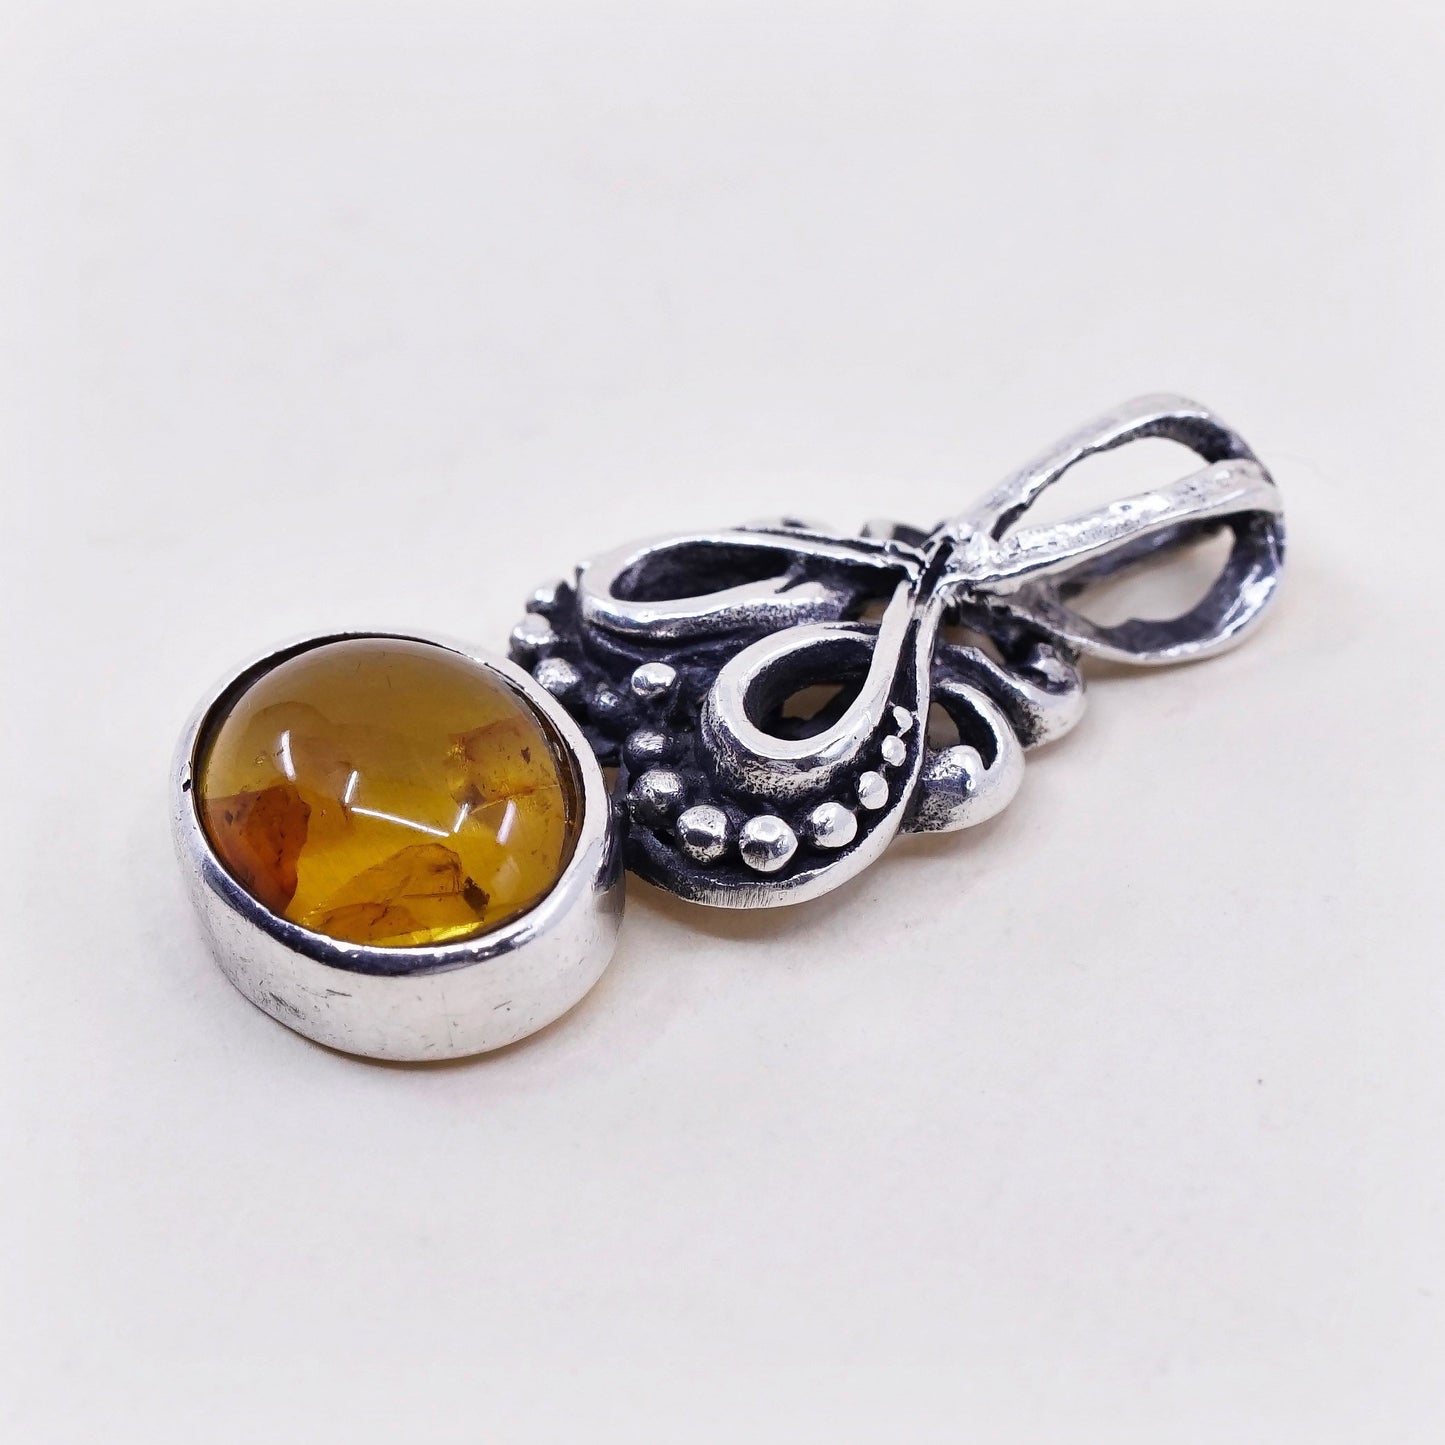 Vintage sterling 925 silver handmade pendant with oval amber and beads around